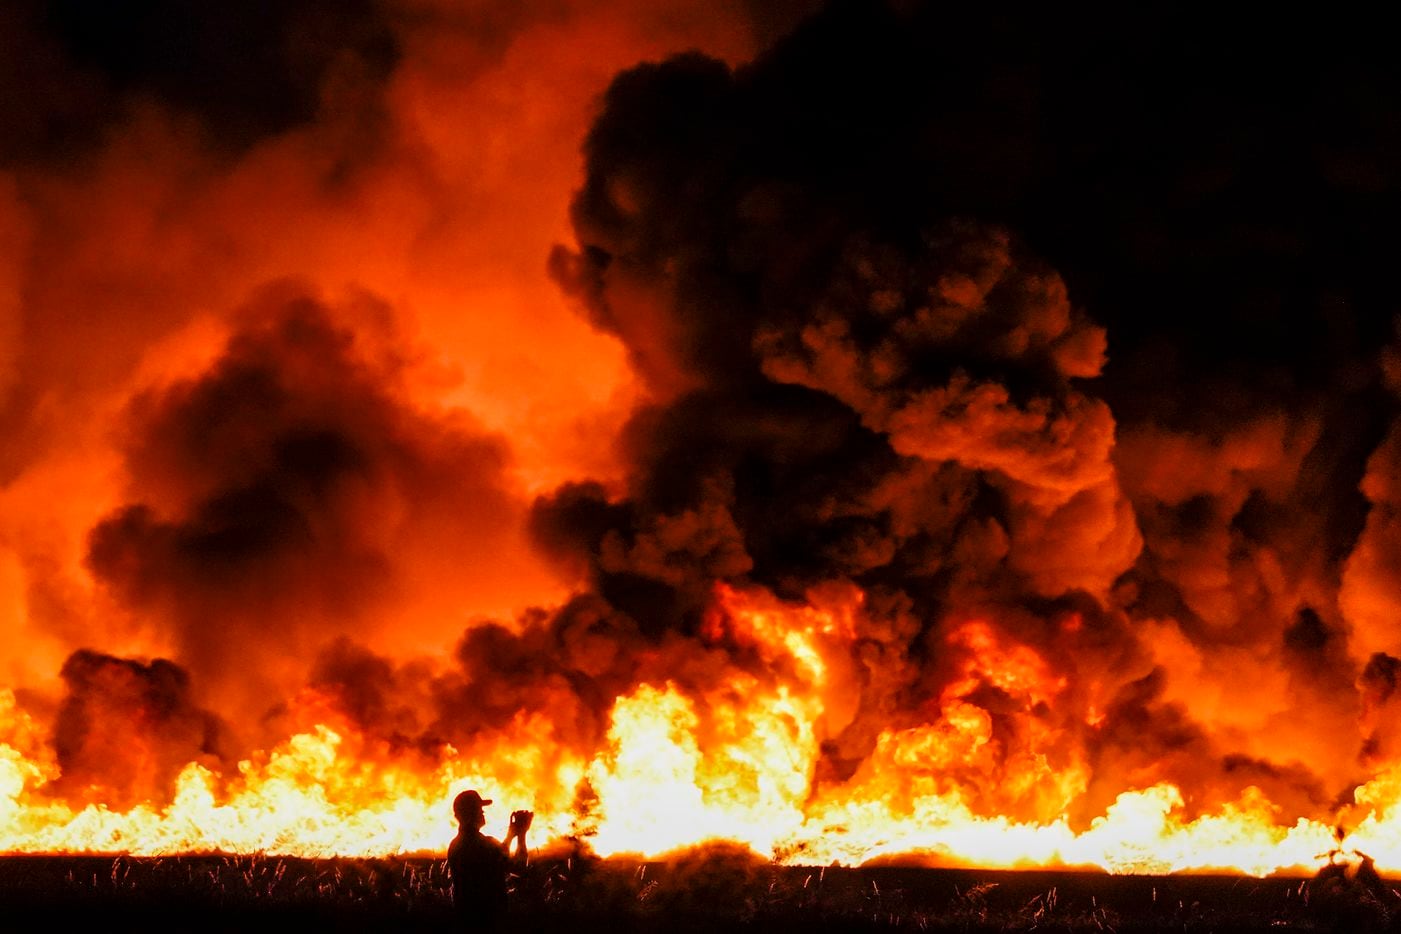 Fire crews battle a massive blaze in an industrial area of Grand Prairie in the early morning hours of Wednesday, Aug. 19, 2020.